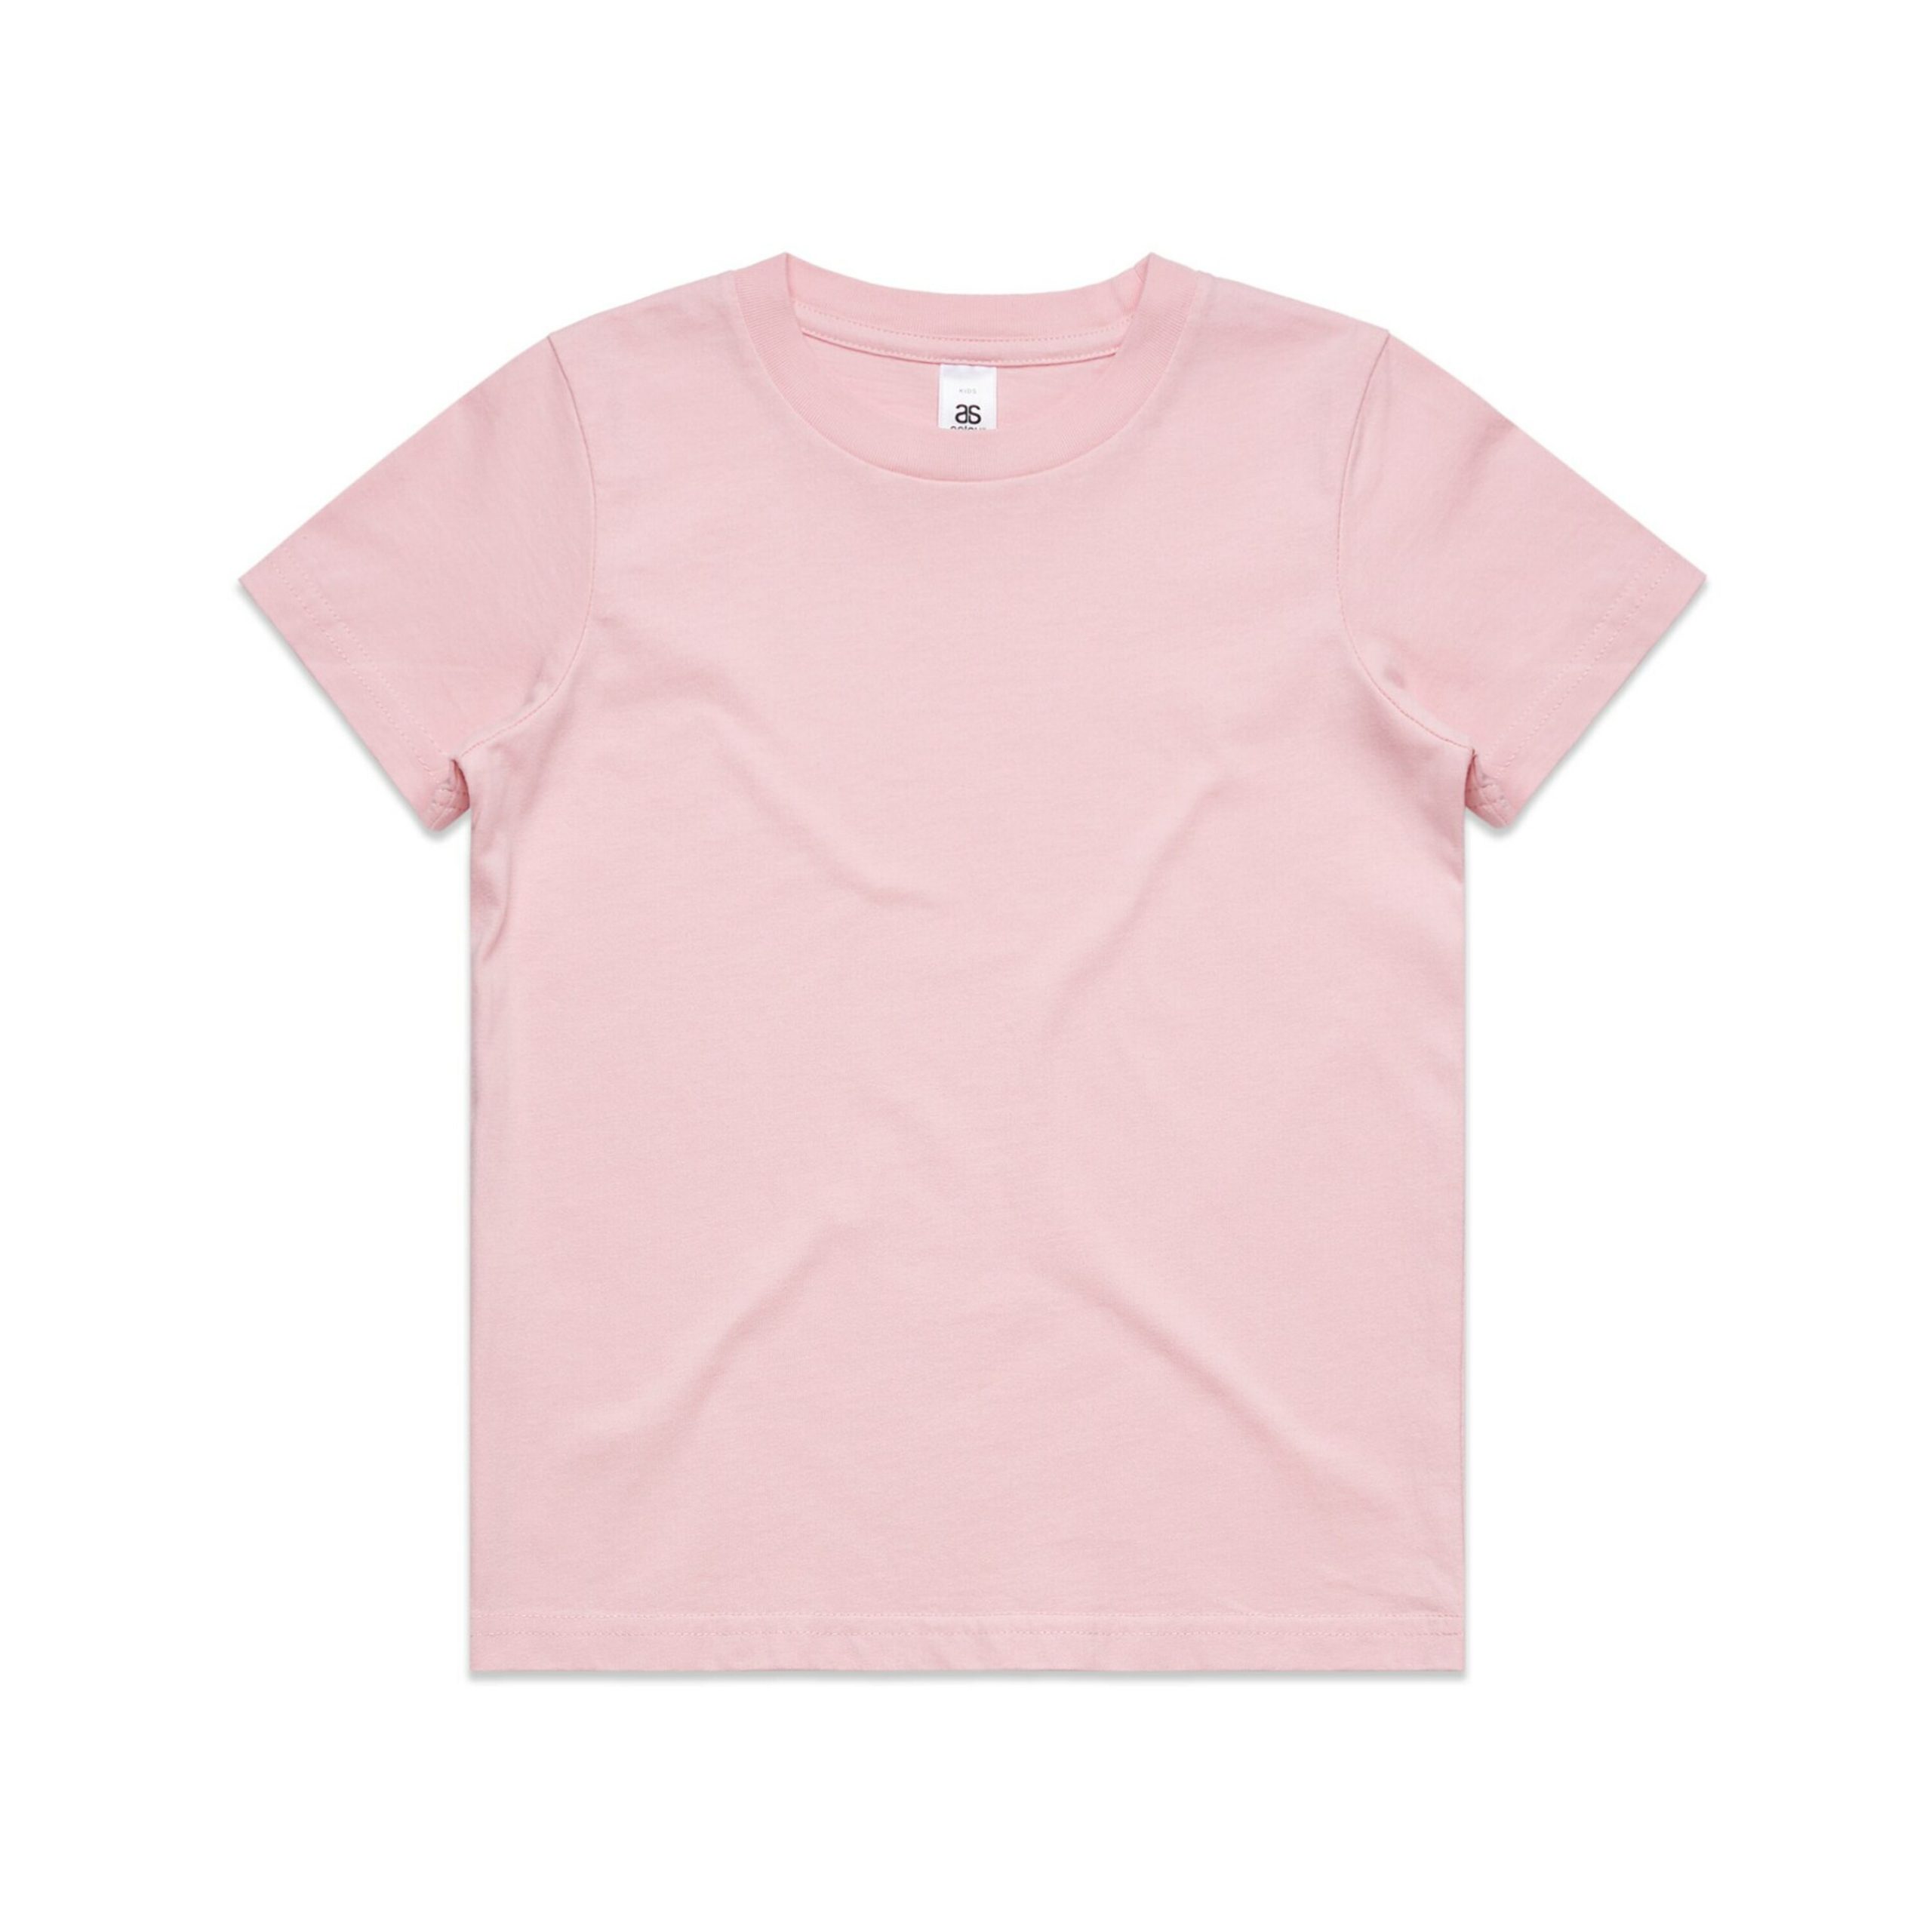 3005_AS_Kids-Tee_Pink-scaled